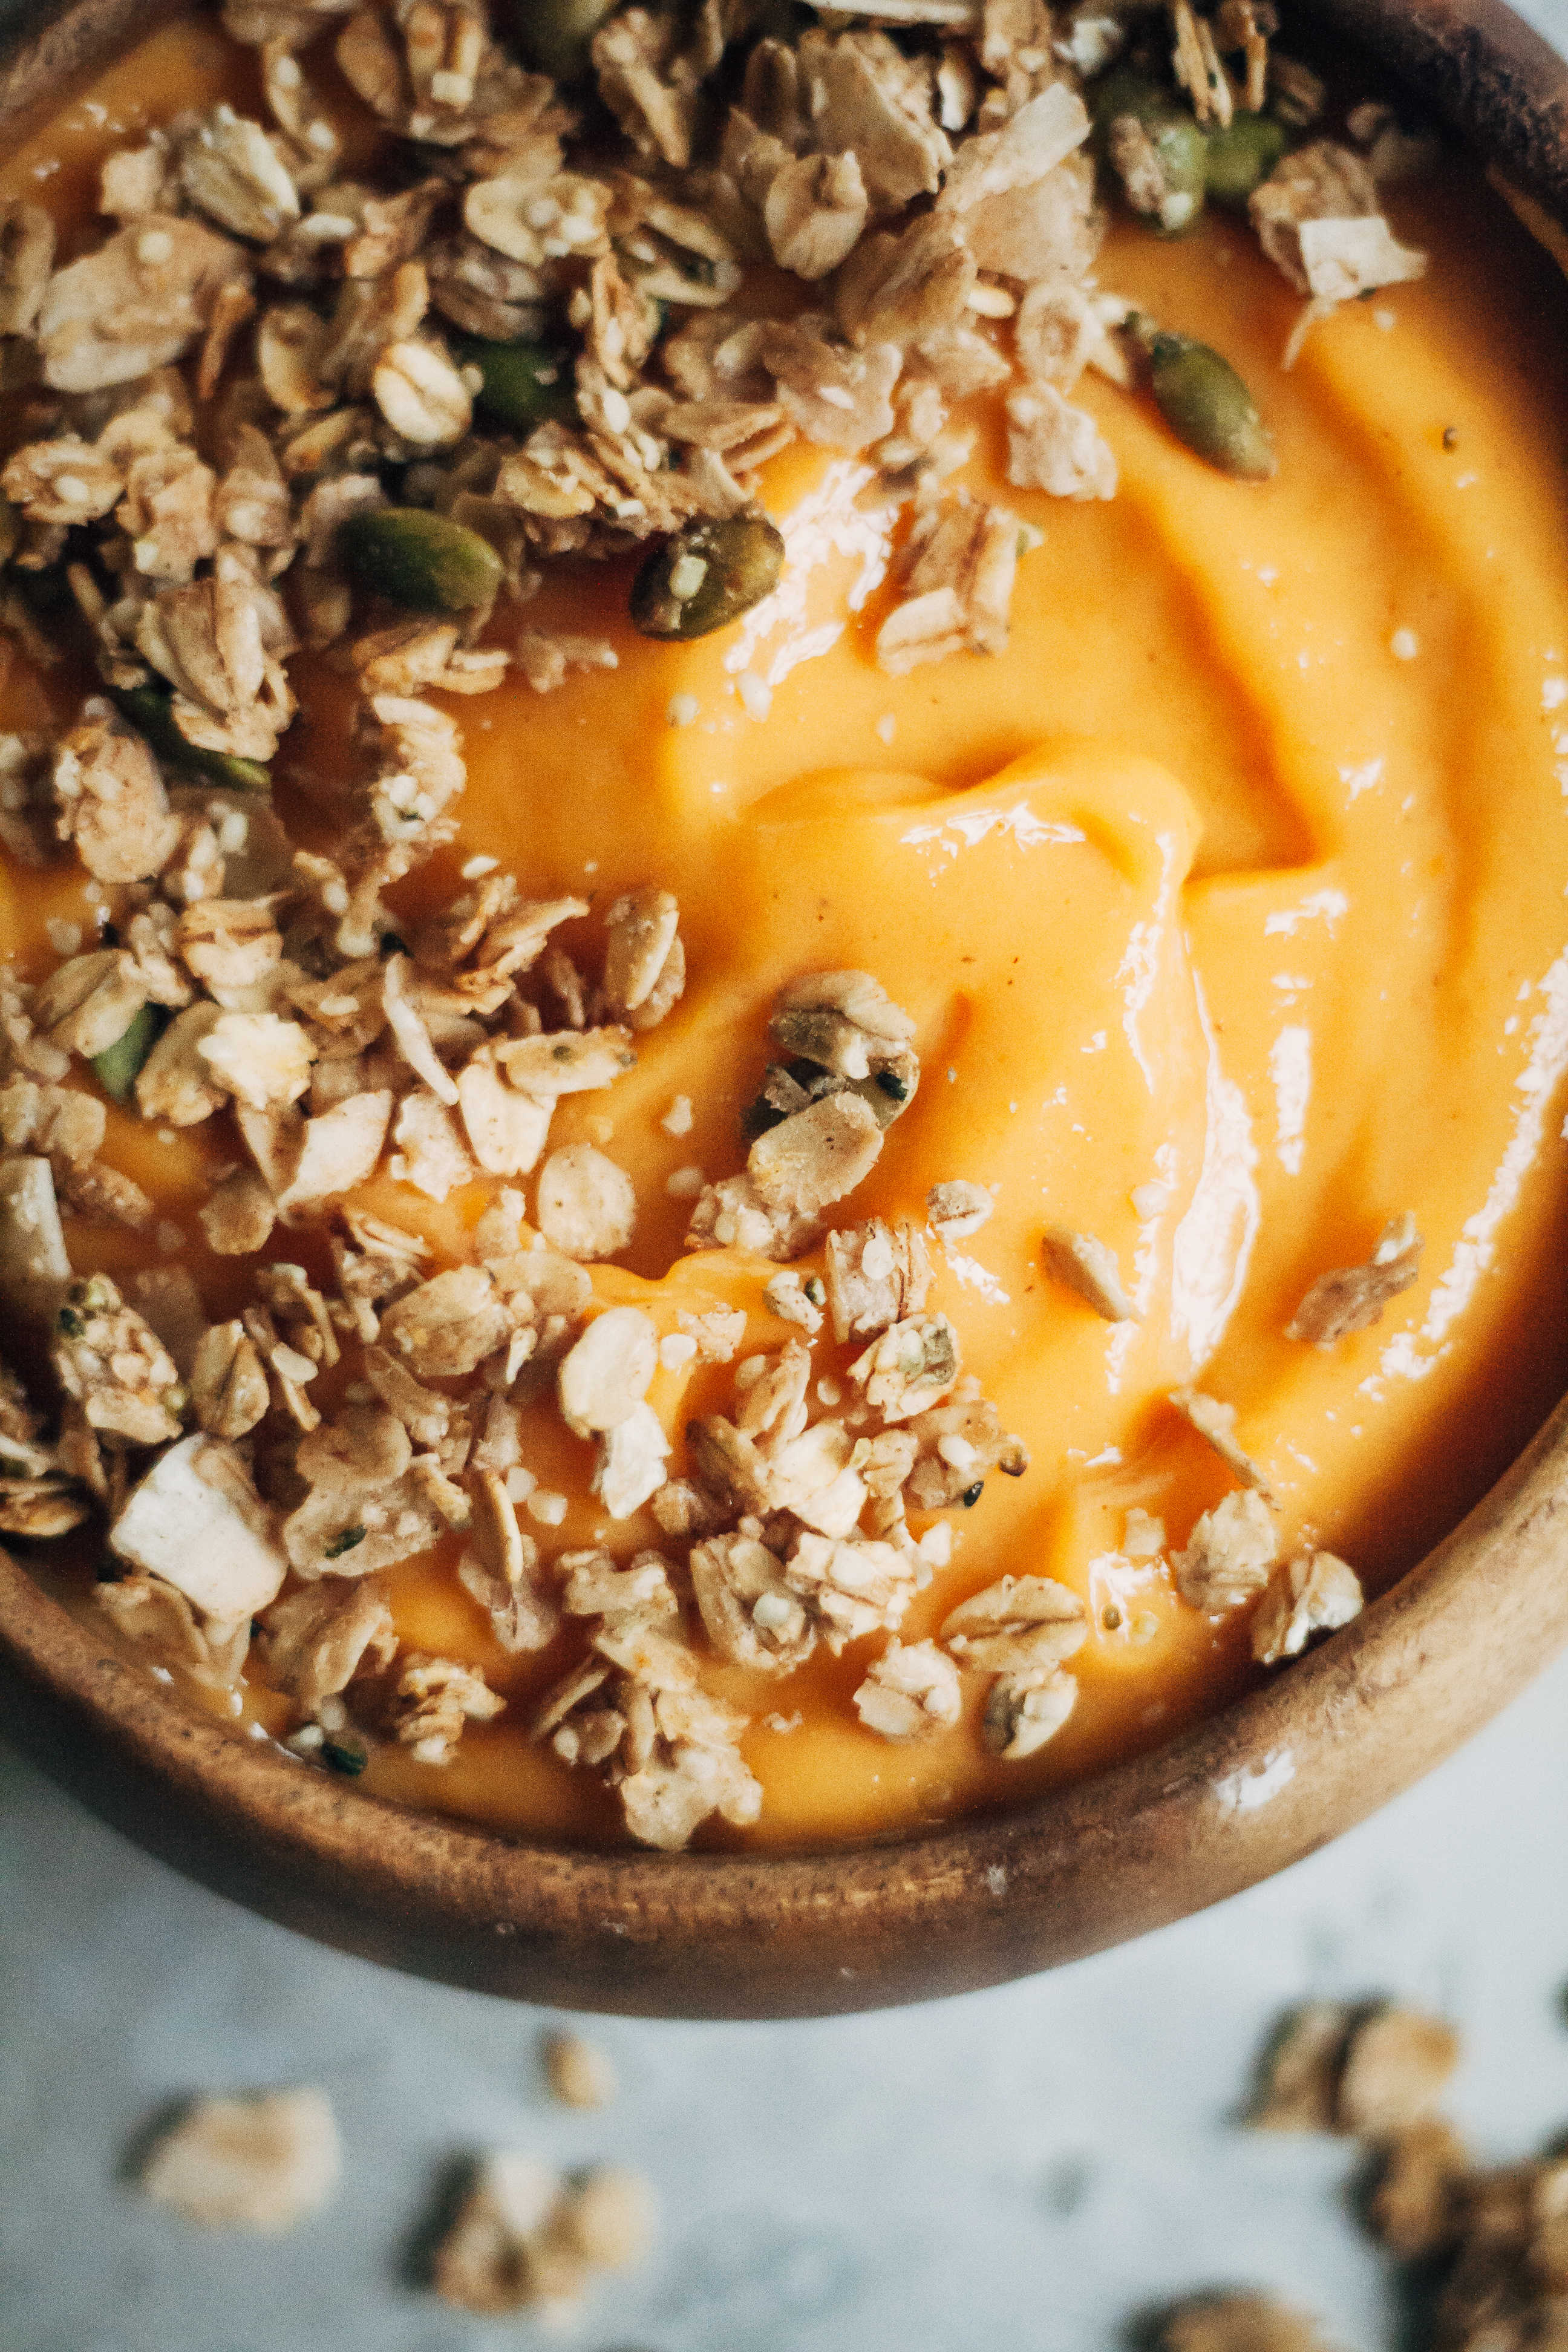 Persimmon Smoothie + Cinnamon Granola | Well and Full